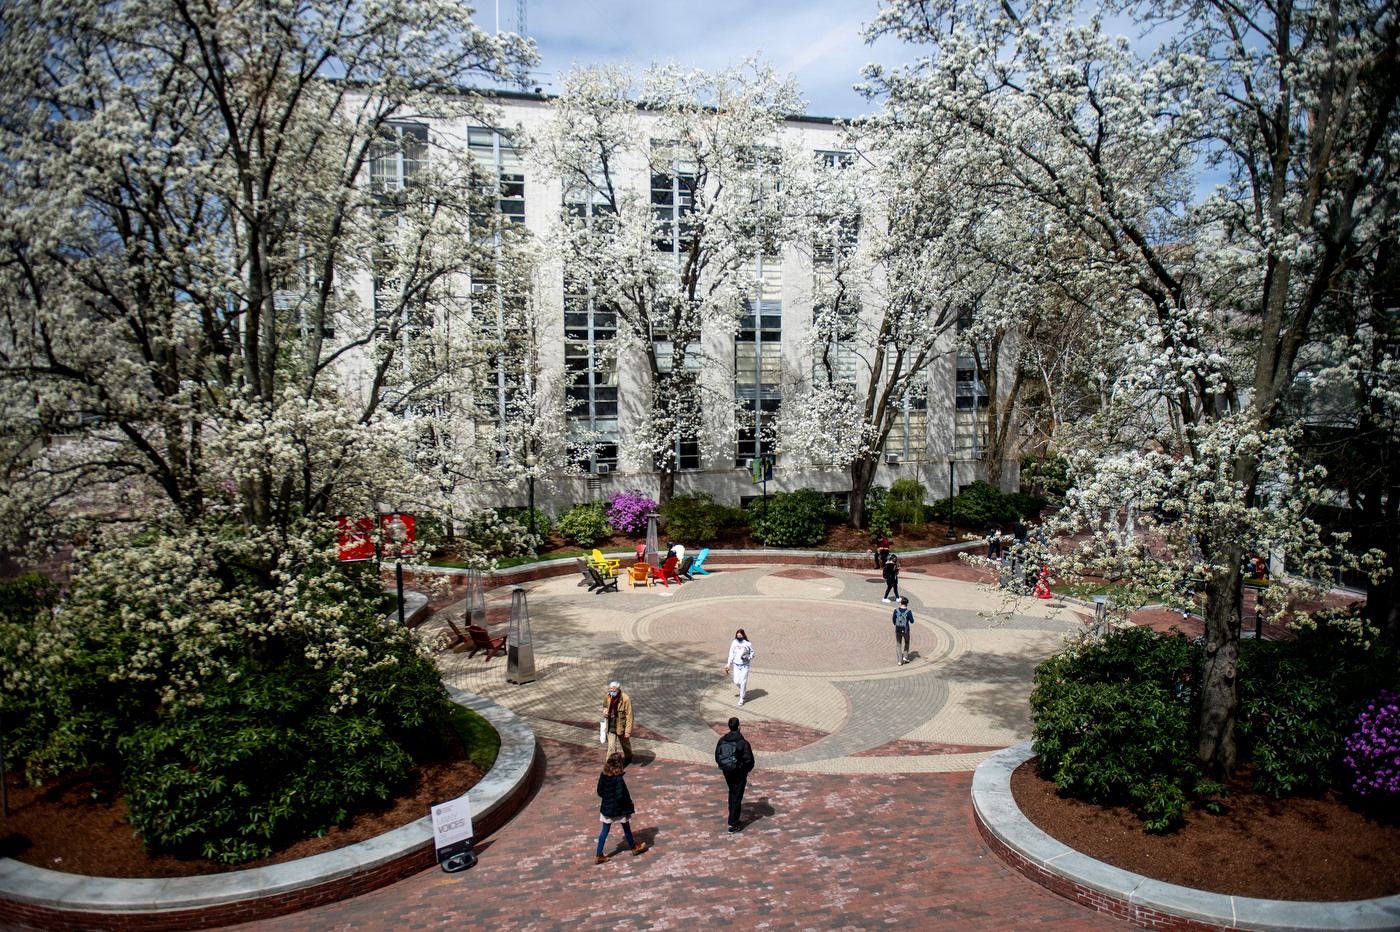 Visiting Northeastern: An Insider's Guide